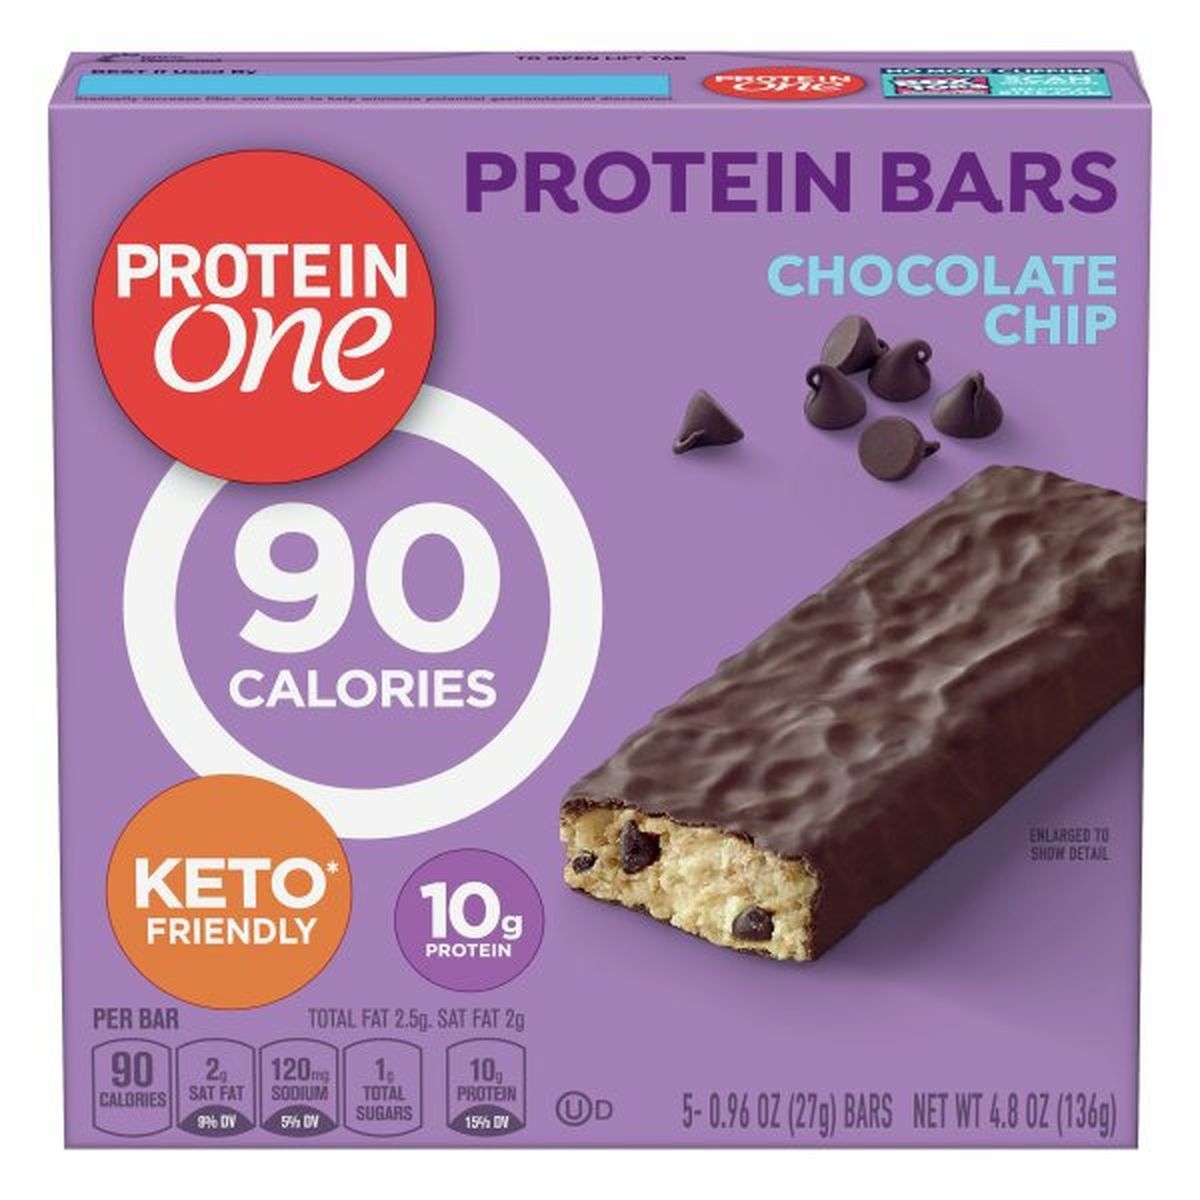 Calories in Protein One Protein Bars, Chocolate Chip